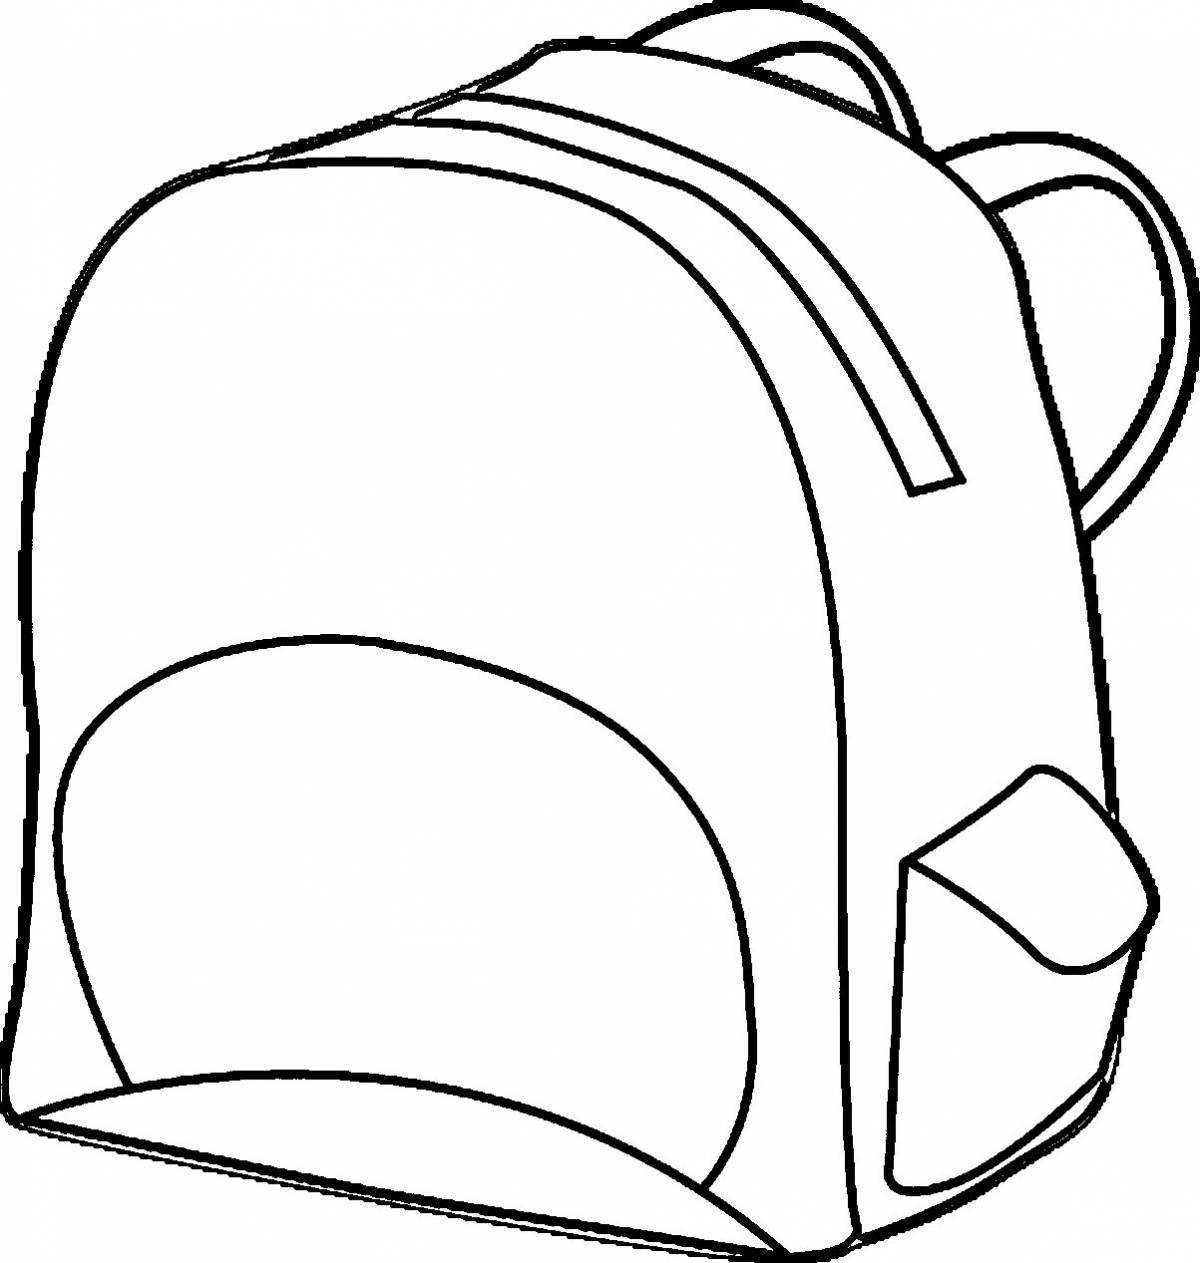 Playful backpack coloring page